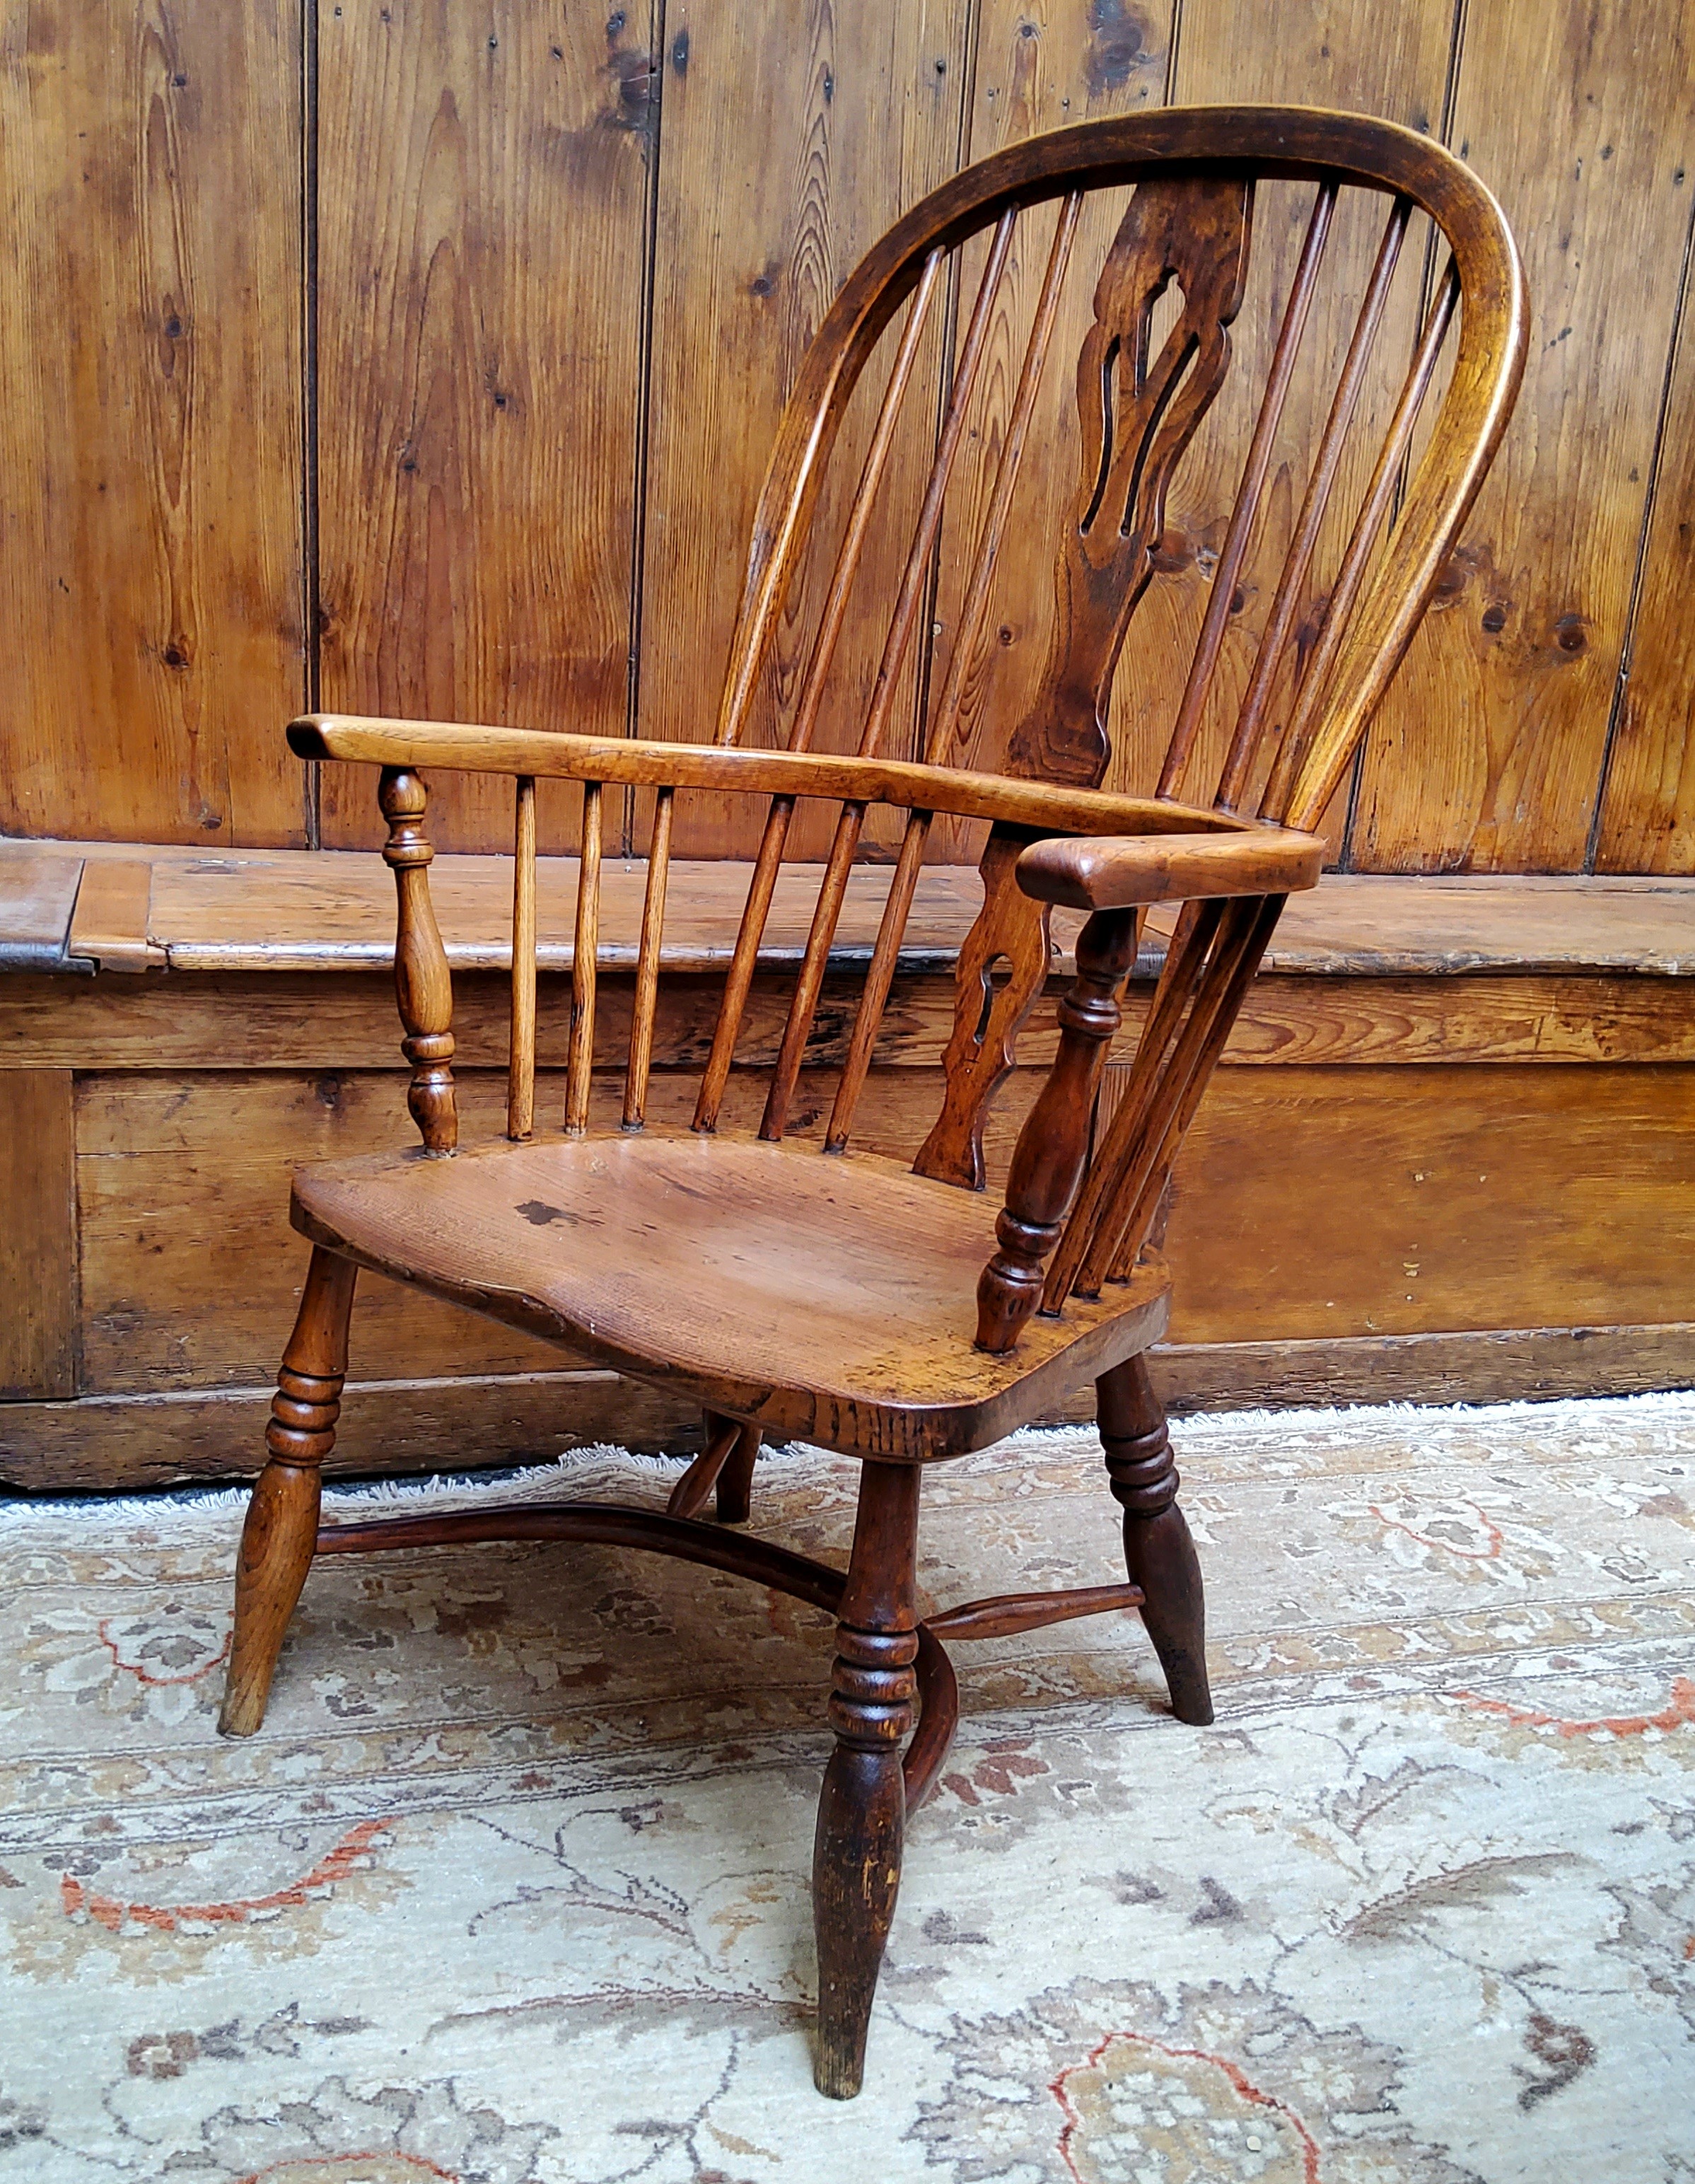 An early 19th century ash and elm Windsor chair with crinoline stretcher c.1820